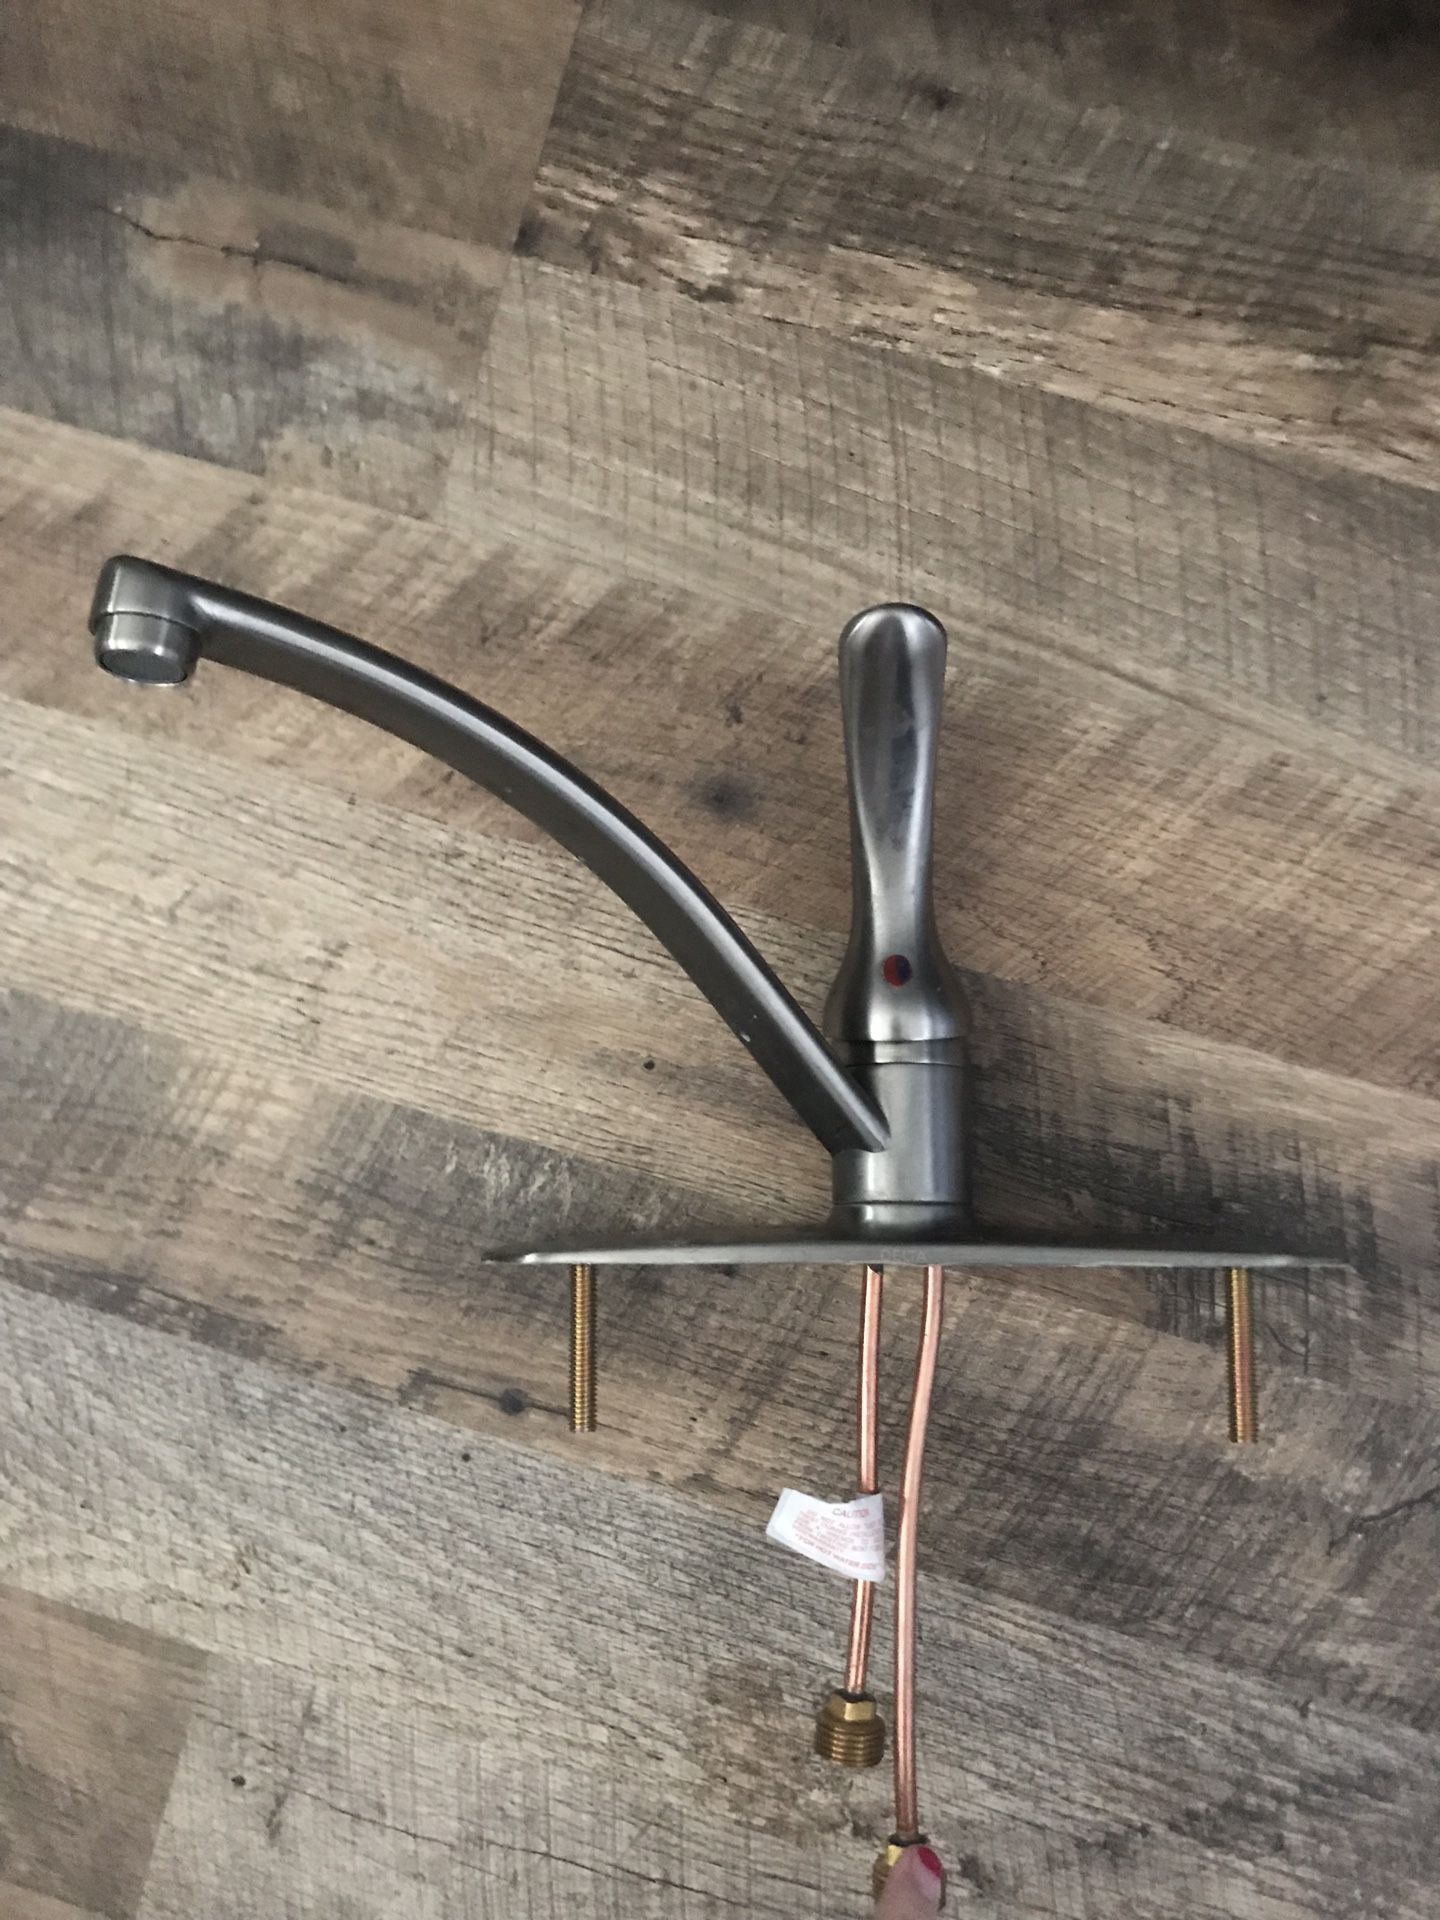 $45 OBO. Brushed nickel kitchen faucet in excellent condition!